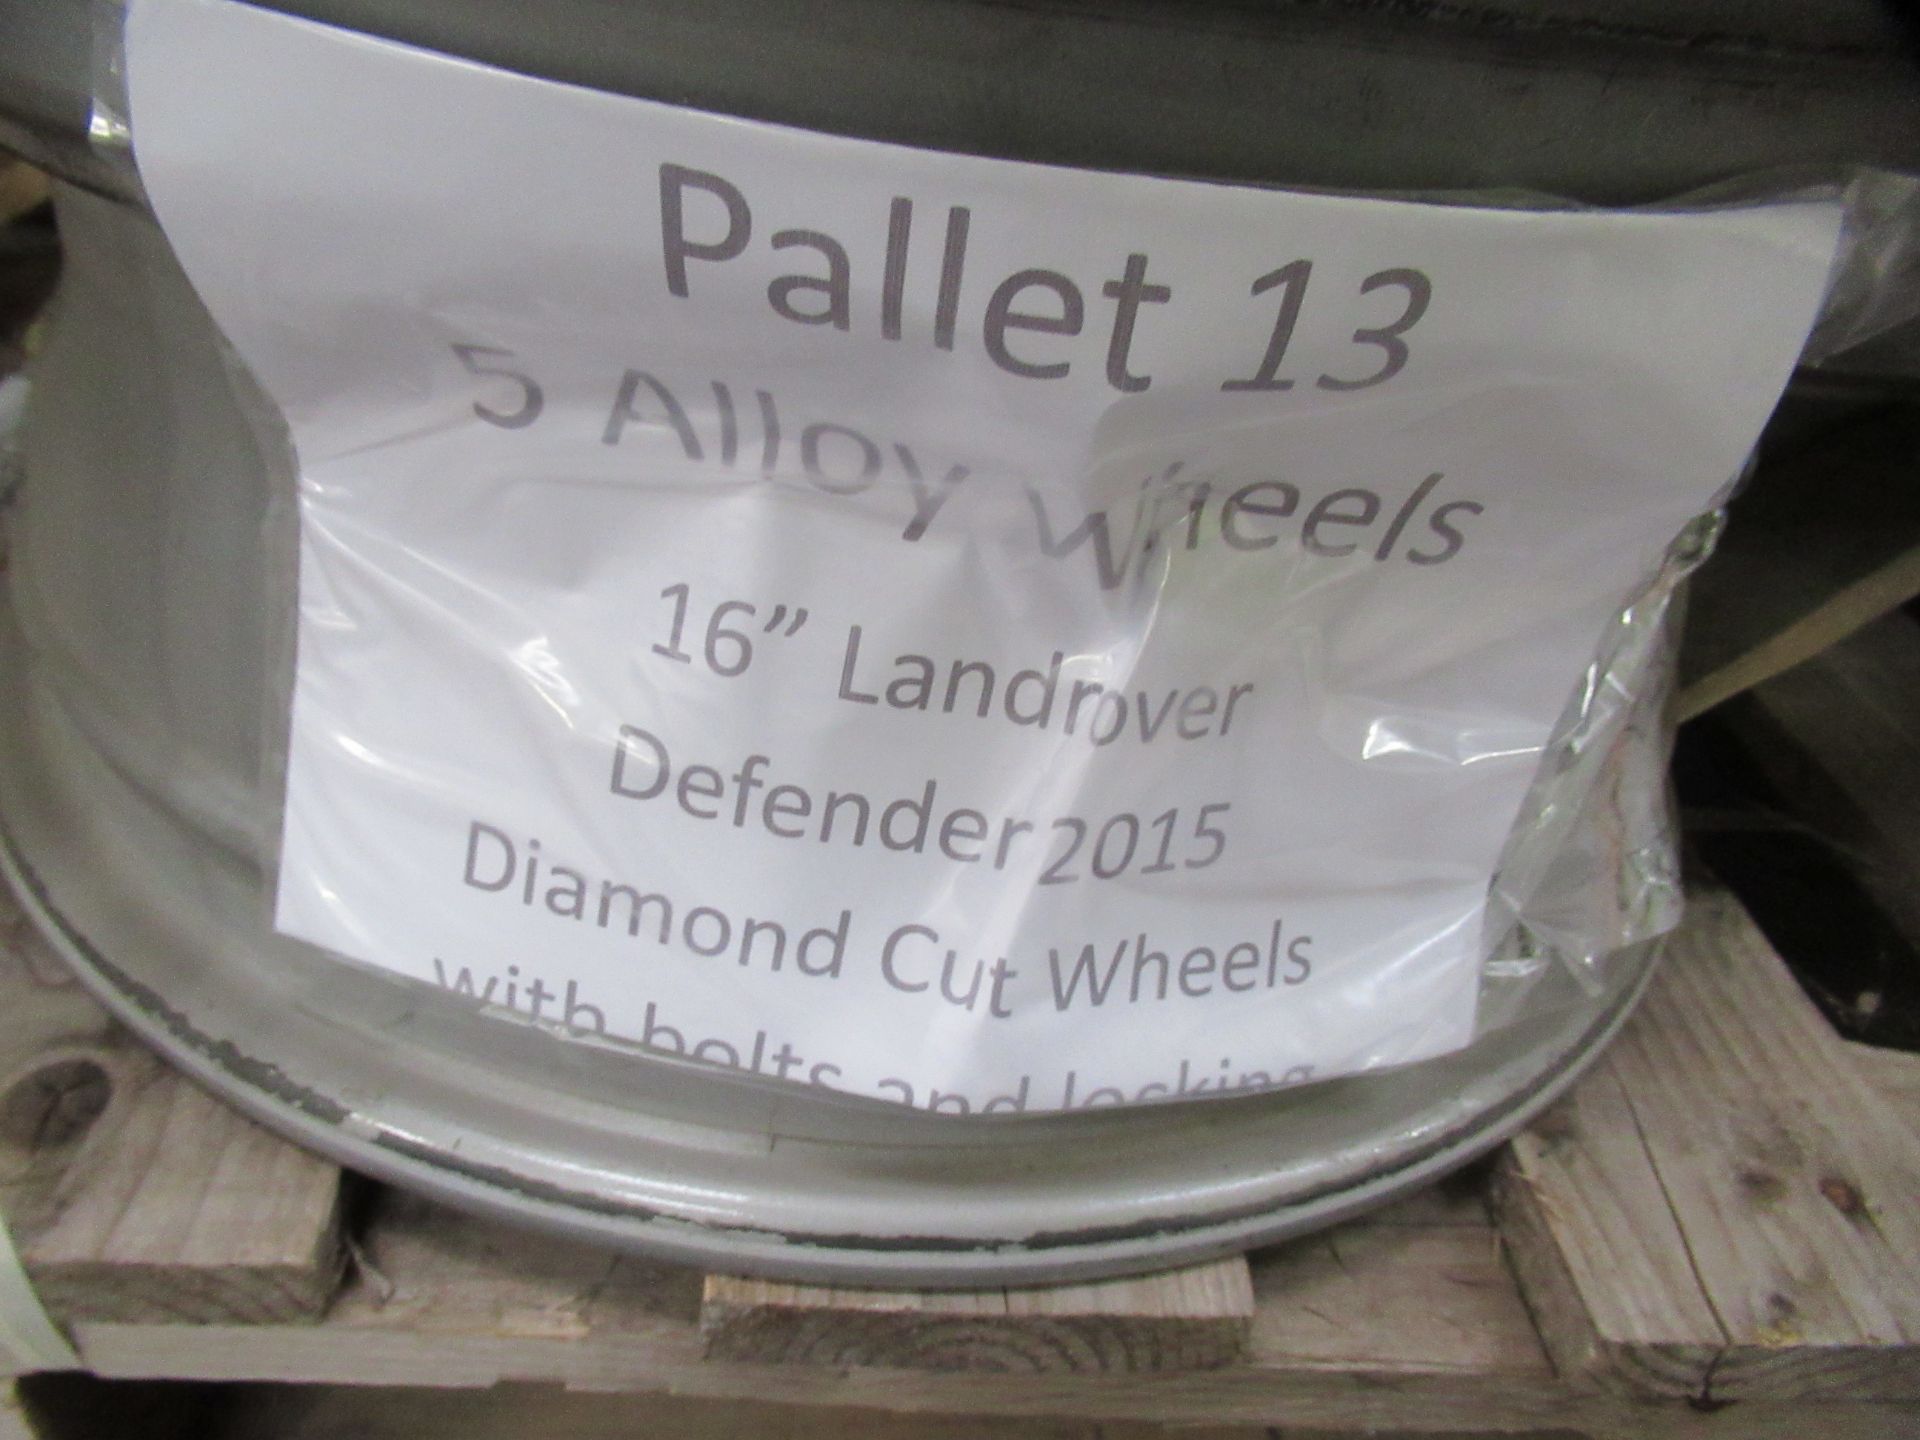 5x 16" 2015 Landrover Defender Diamond Cut Wheels with Bolts & Locking Nut - Image 3 of 3